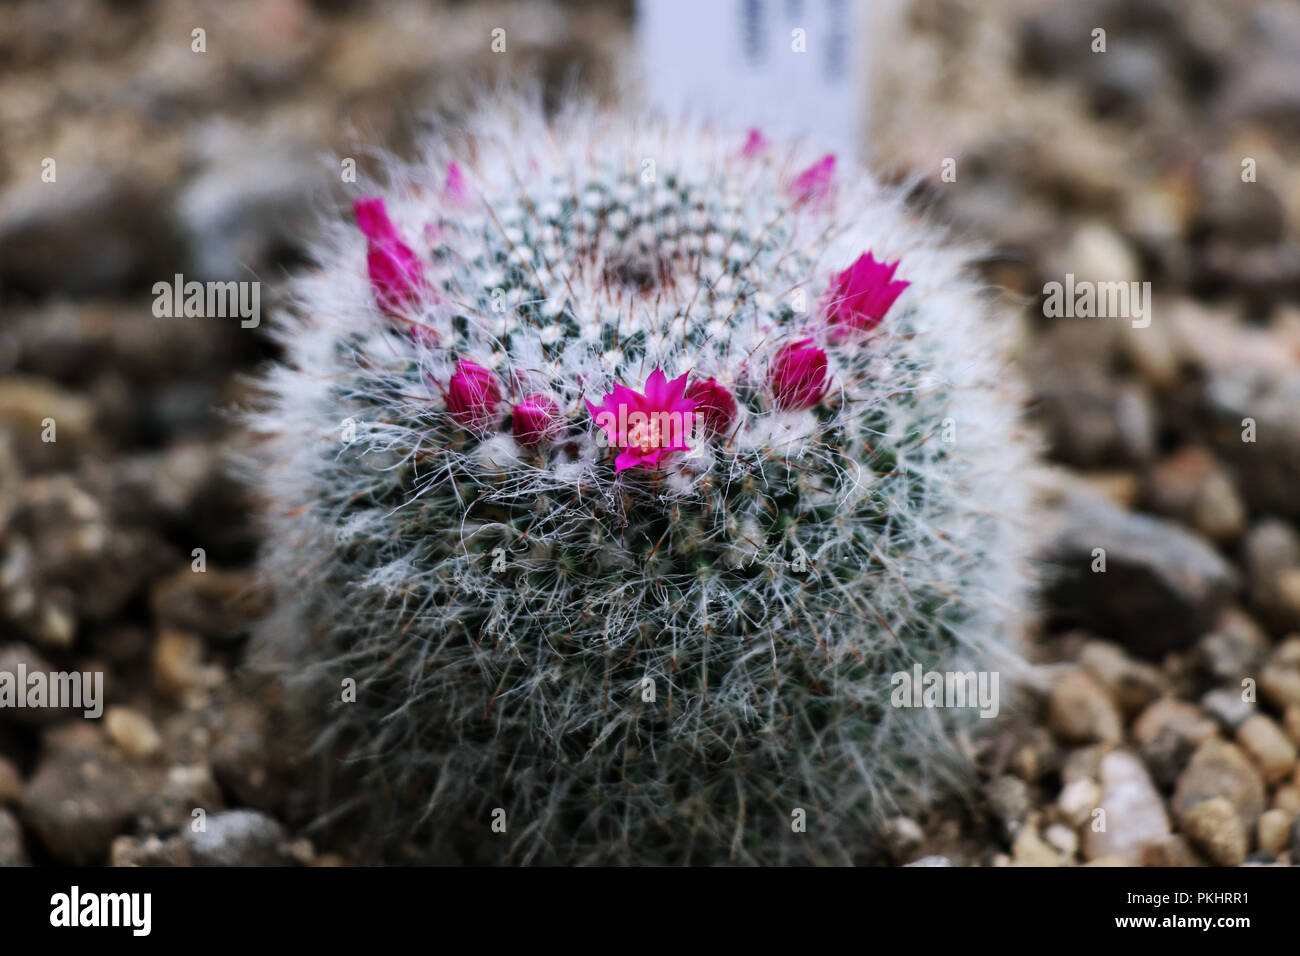 A beautiful bush famous as Mammillaria hahniana with many petals located in gravel in greenhouse Stock Photo